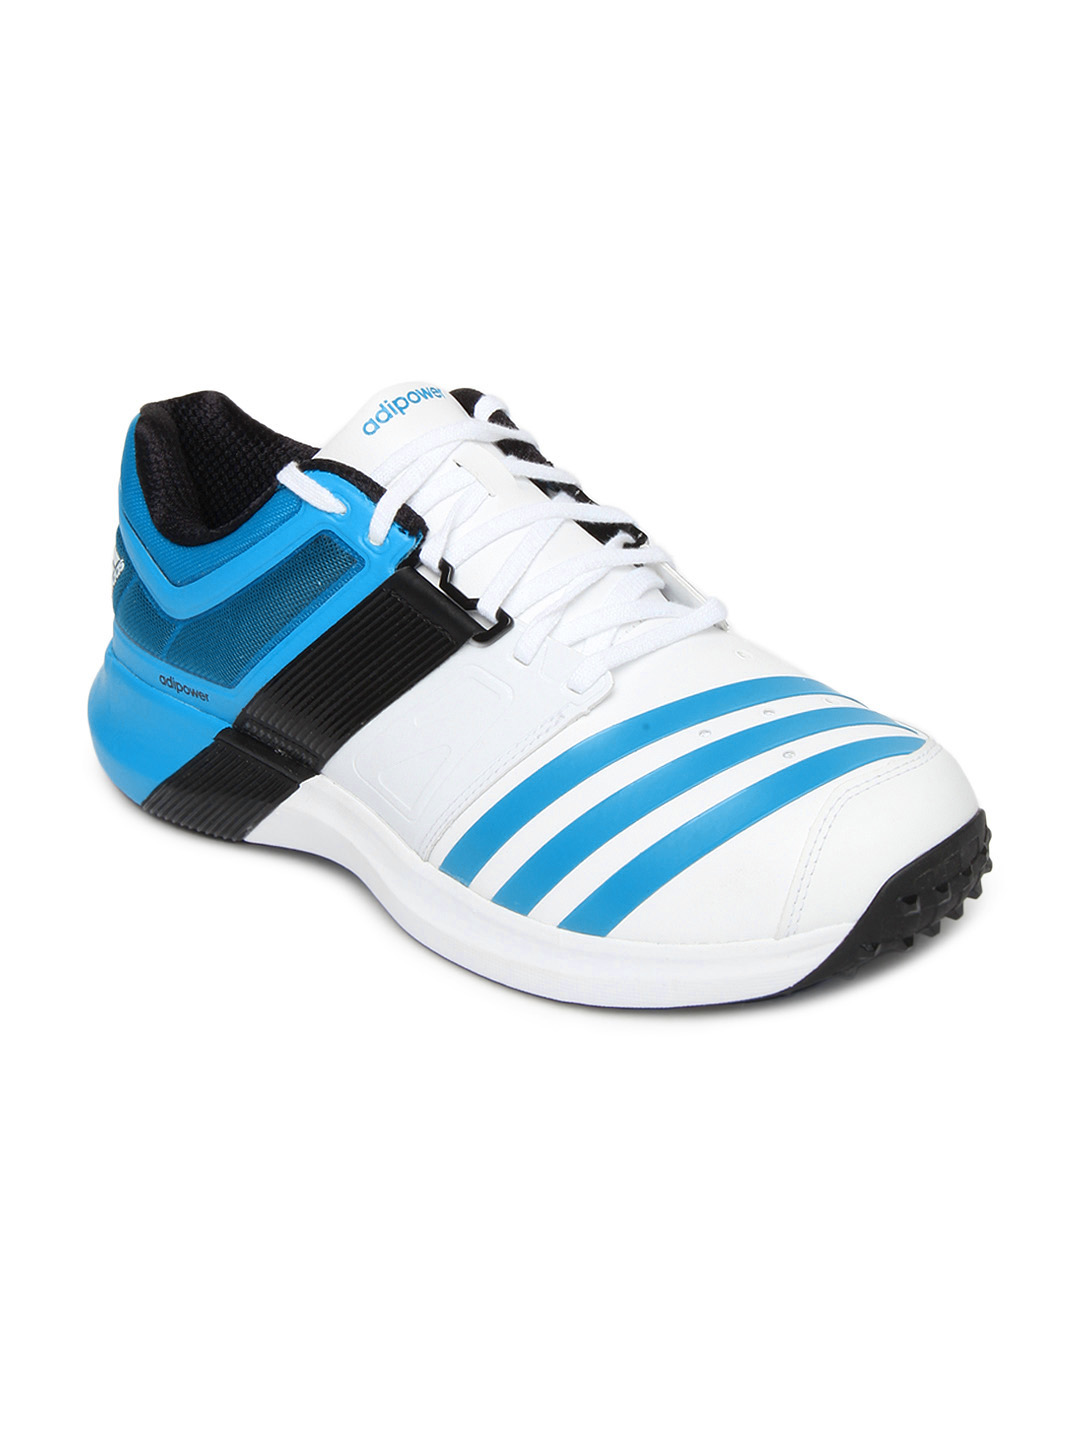 adidas sports shoes with price